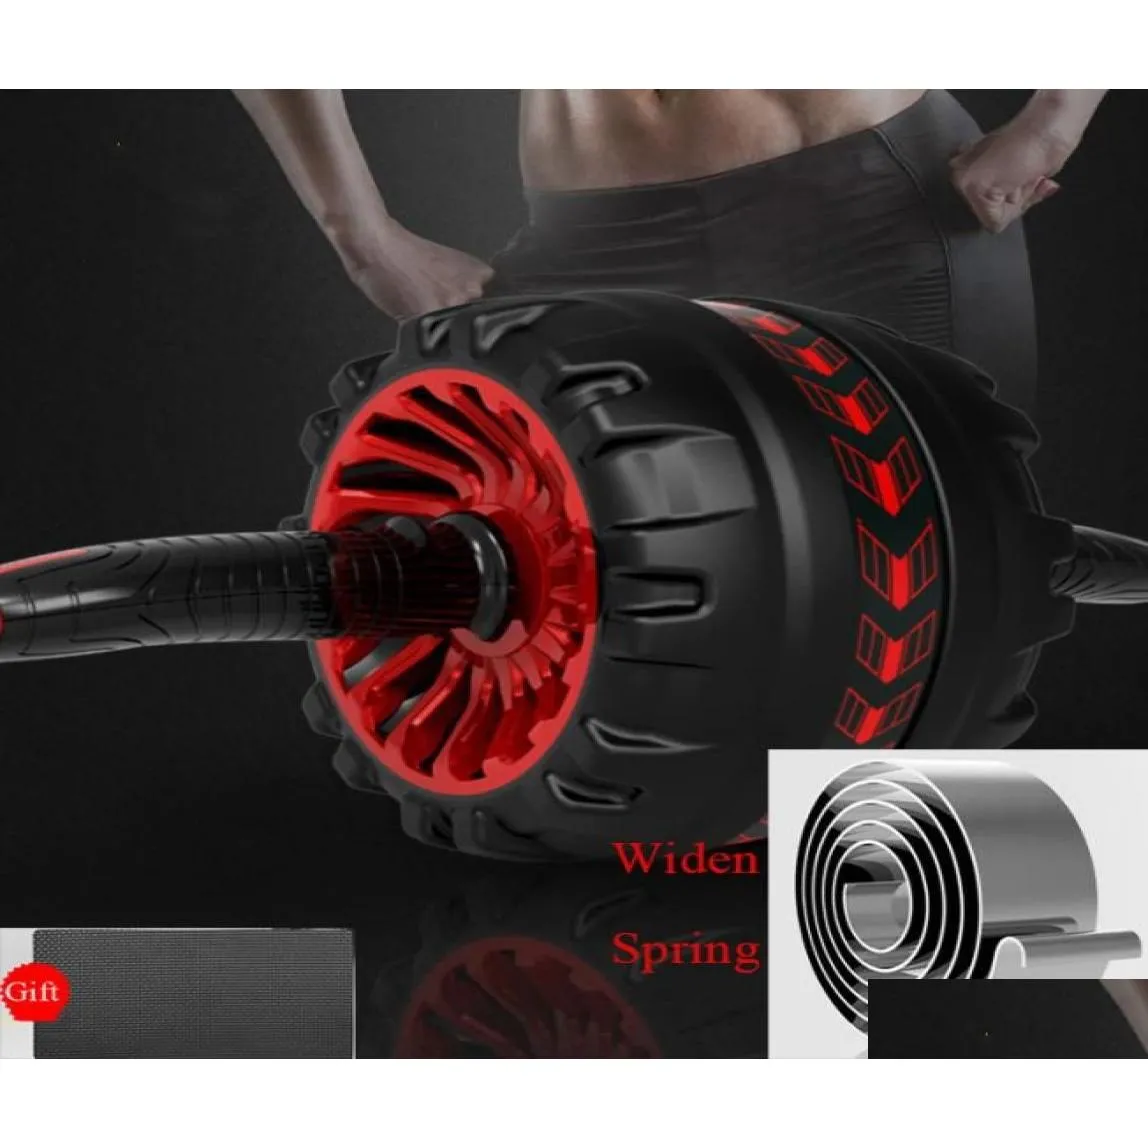 Training Equipment Fitness Ab Roller Home Gym Abs Wheel Press Abdominal Trainer Widen Strong Spring Matic Rebound Workout Drop Deliv Dhf1N